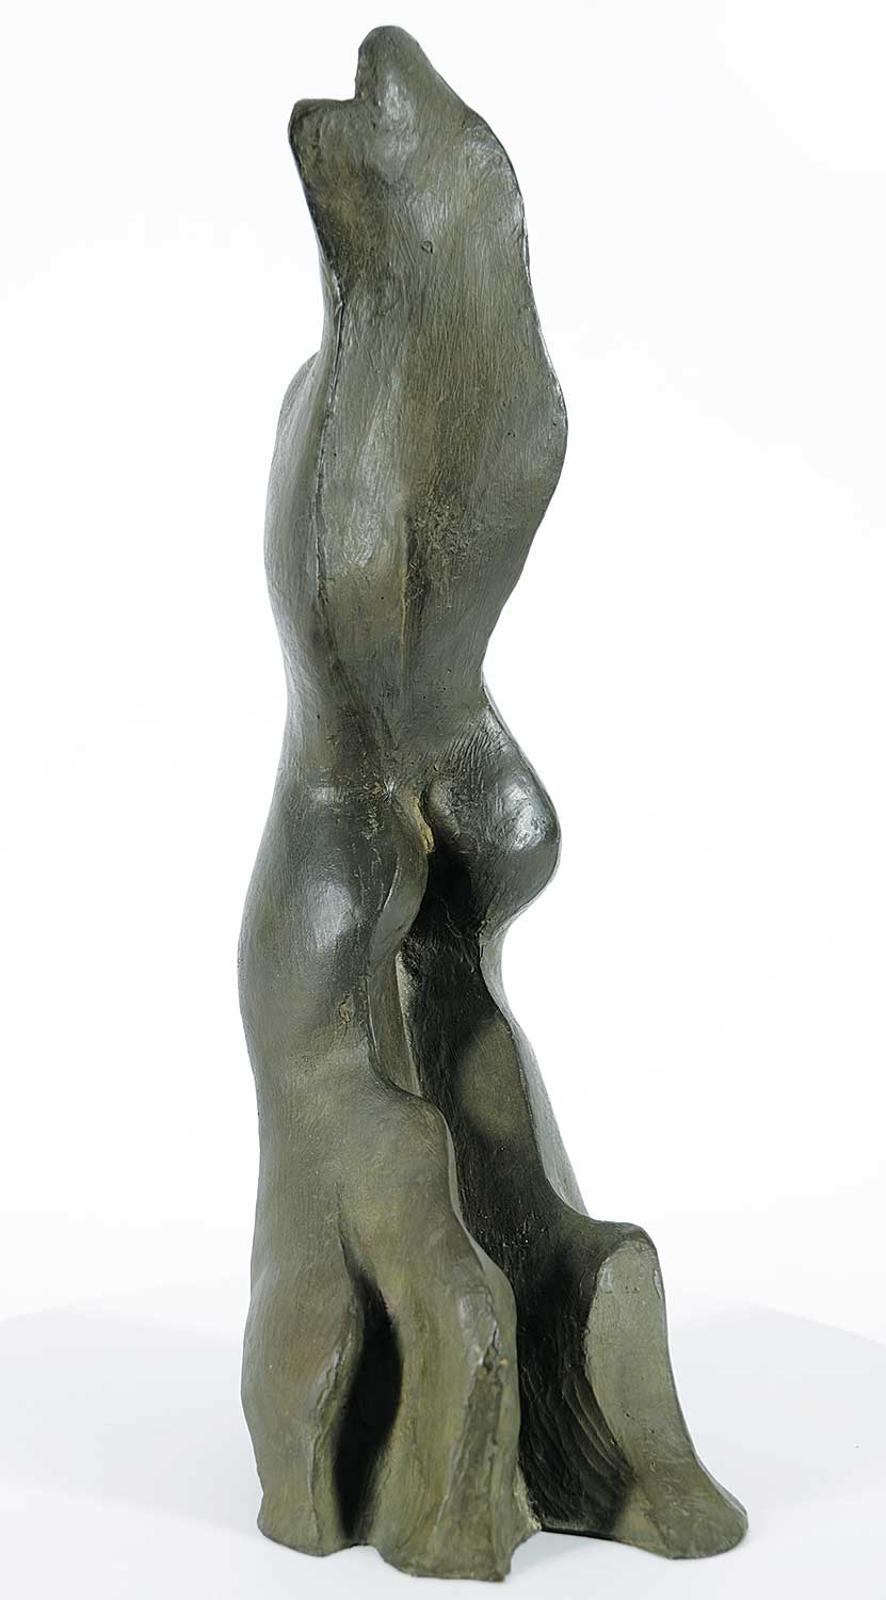 Gerald Gladstone (1929-2005) - Untitled - Abstract Torso  #1/10